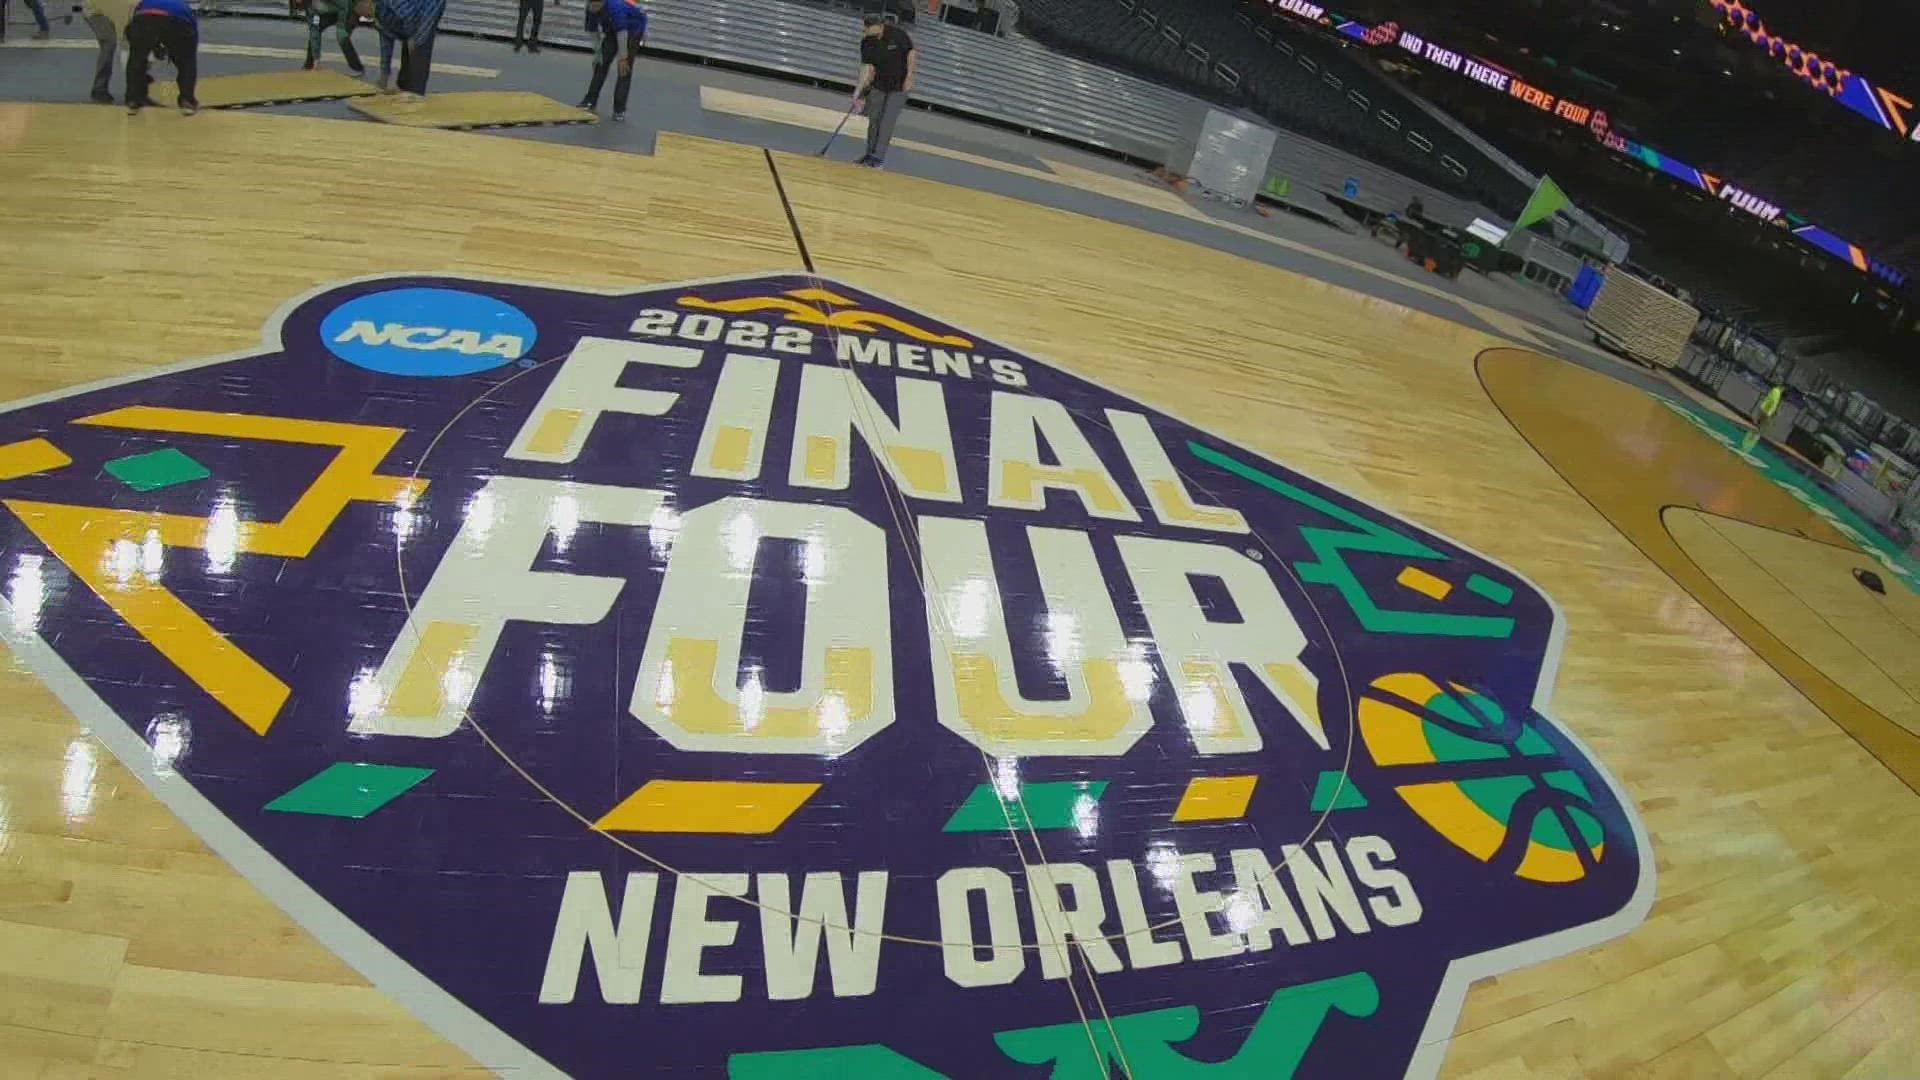 The Scoop with Spoon Final Four New Orleans wwltv